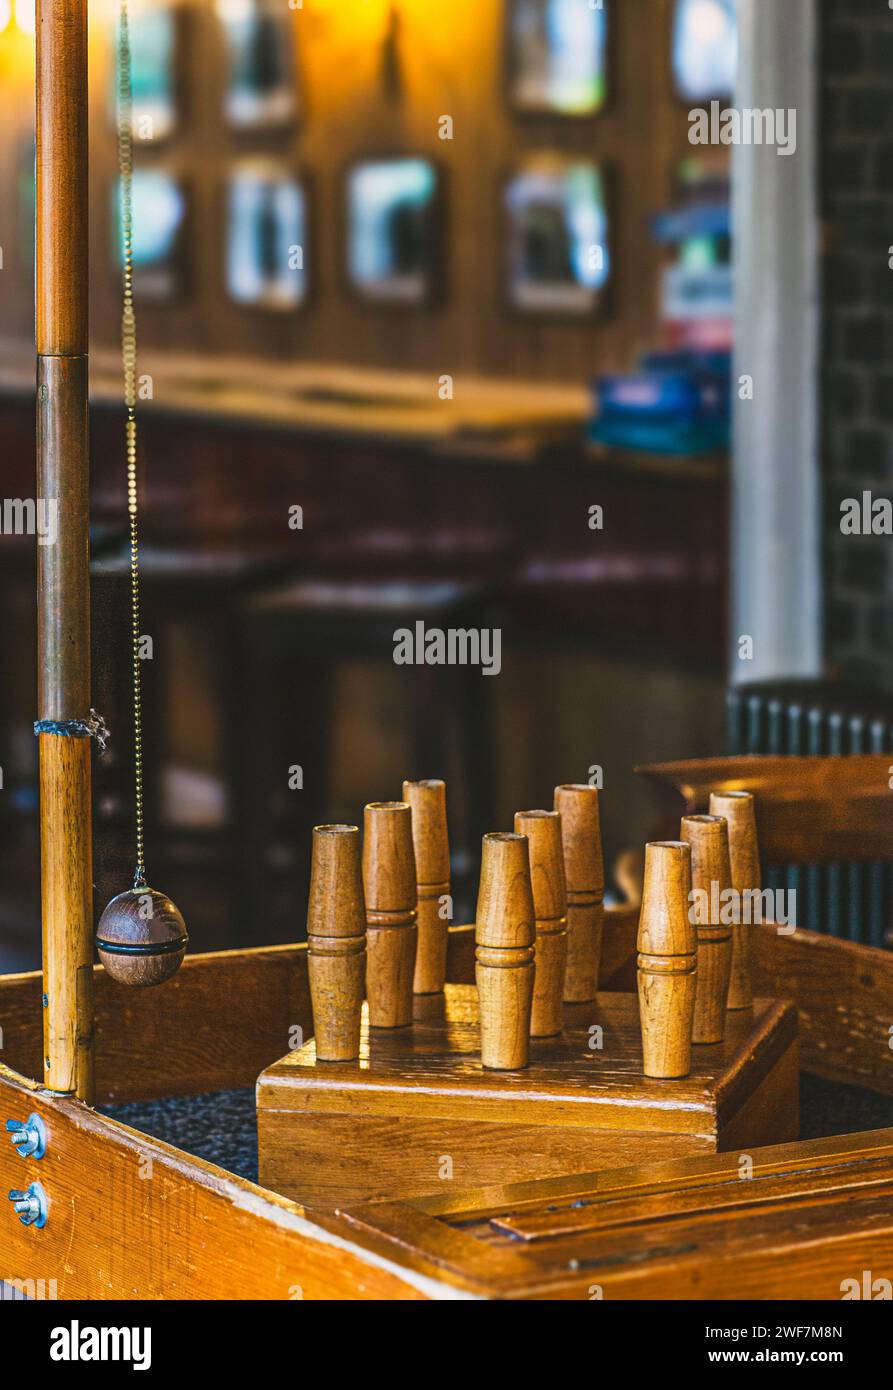 Pub in London with bar skittles a hand-crafted bar game. Stock Photo